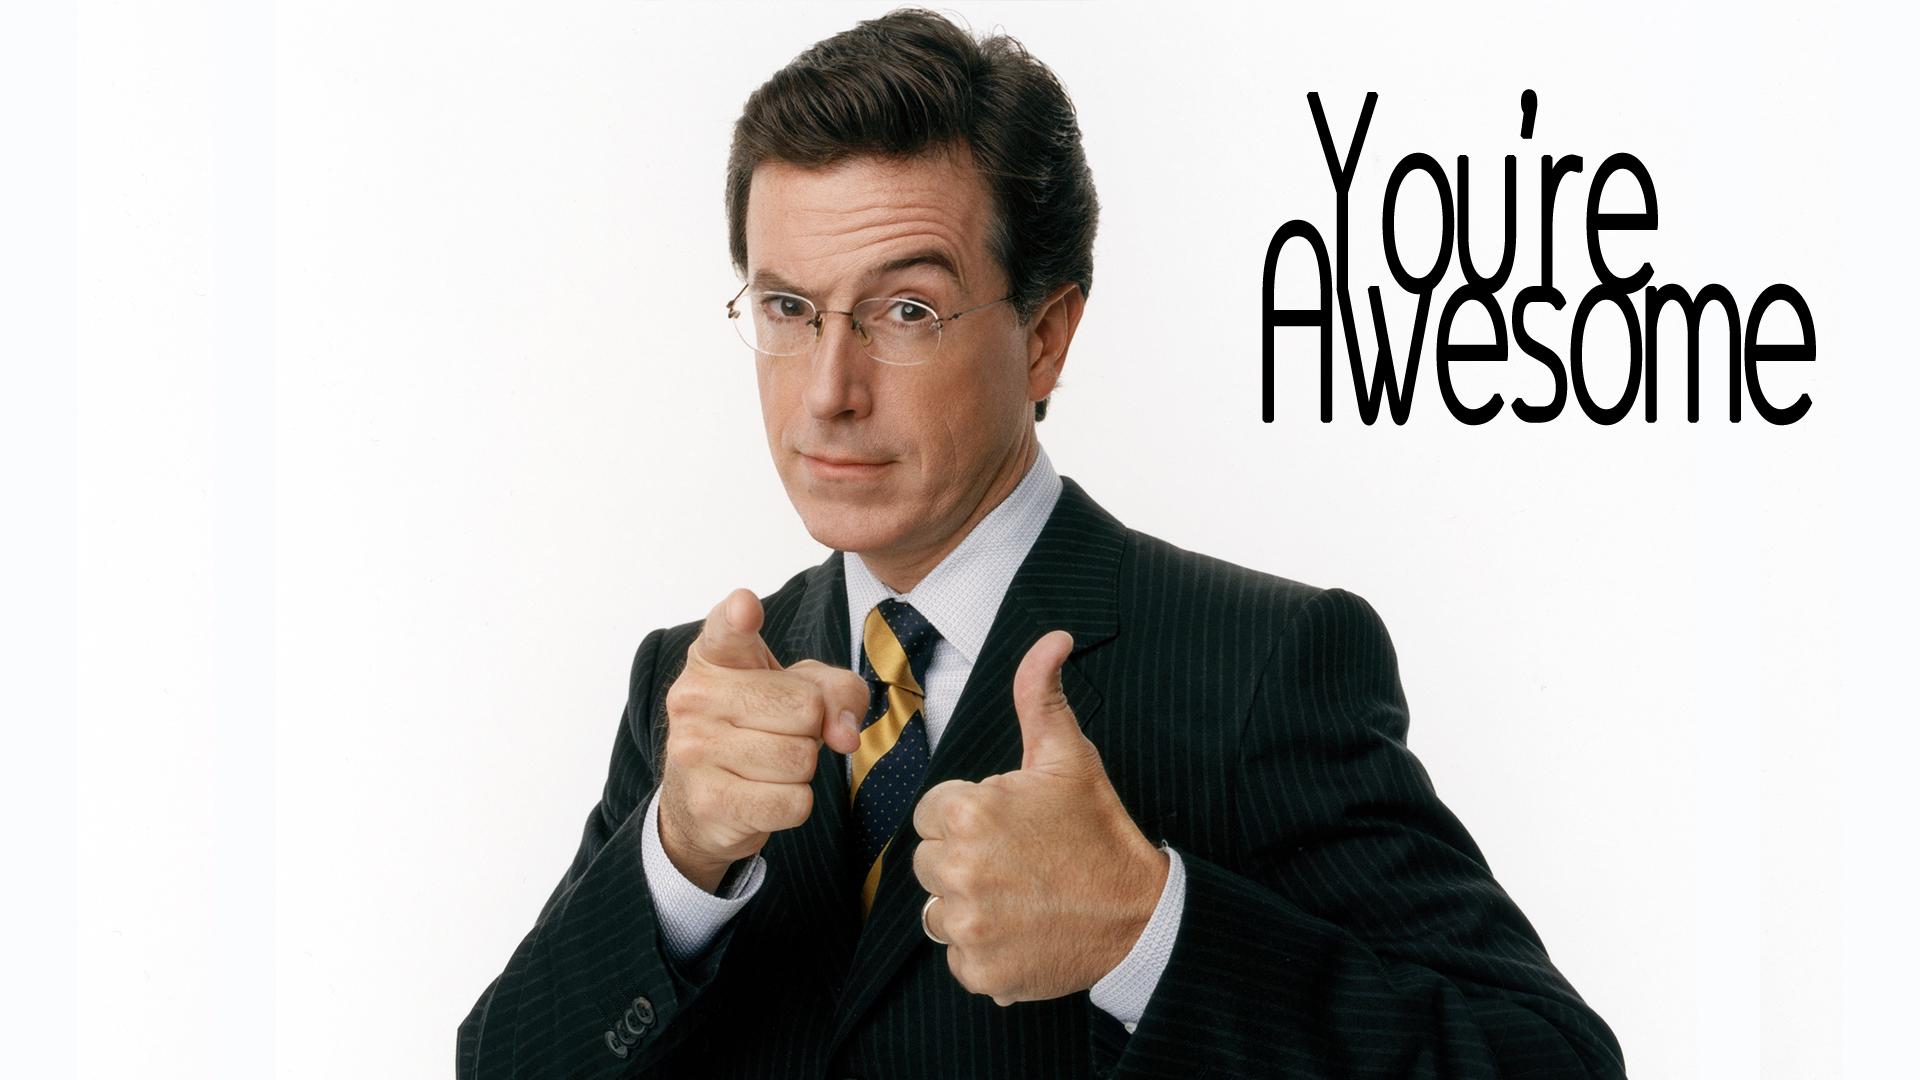 Stephen Colbert You Are Awesome HD Wallpaperx1080